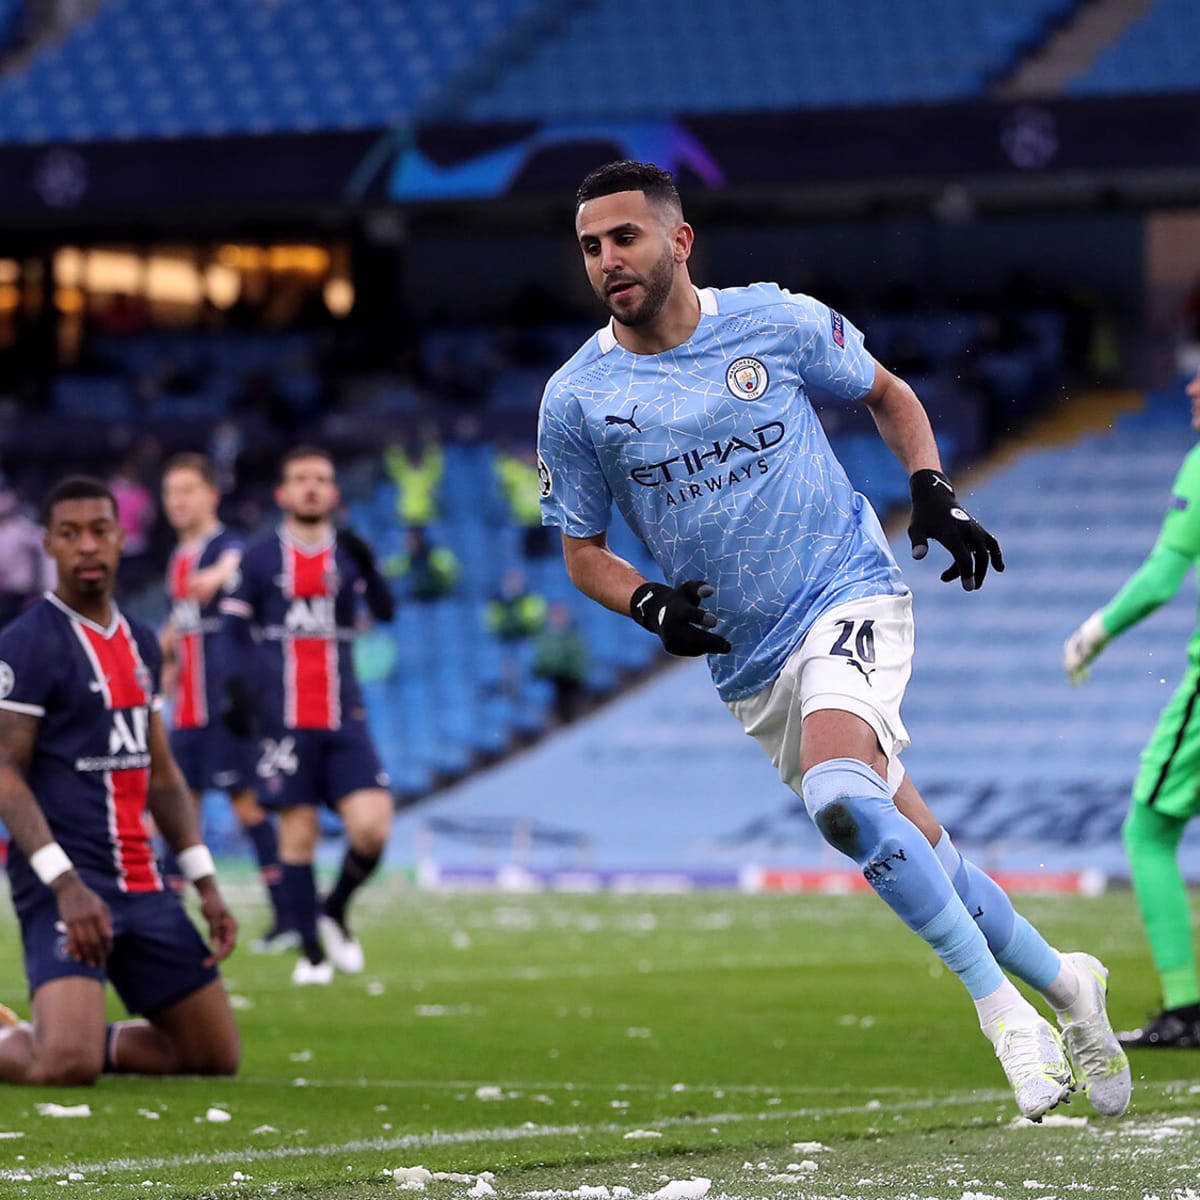 Riyad Mahrez's Double Lifts Man City to First Champions League Final in Win Over PSG